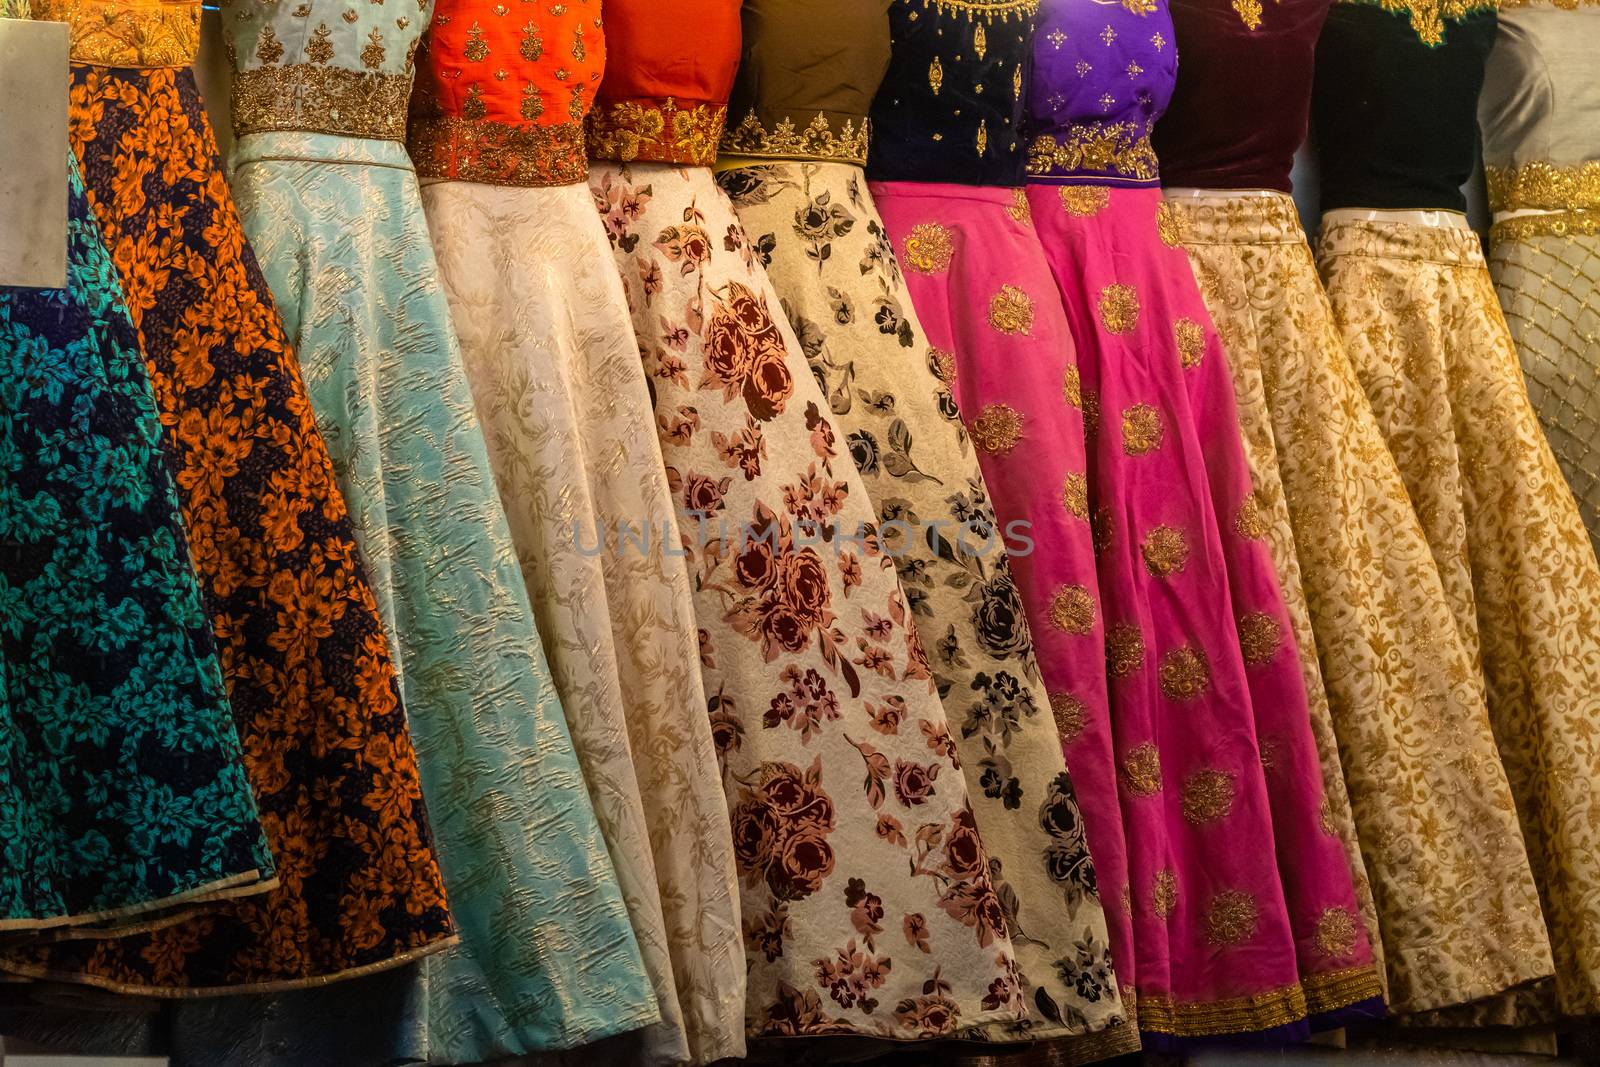 Close up of colourful and decorated Indian dresses in a market